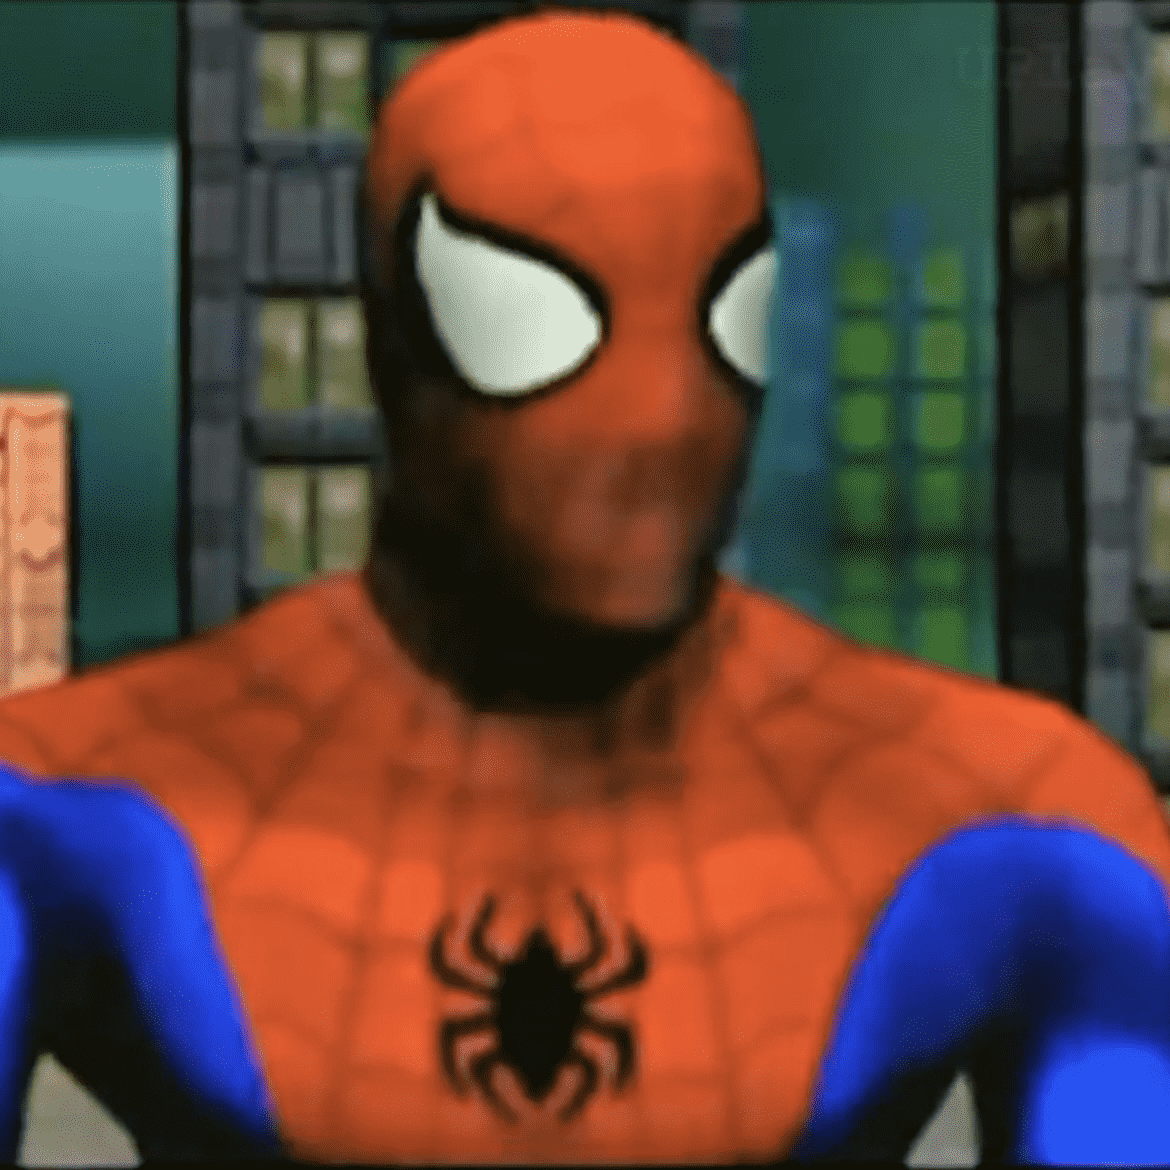 Peter Parker “Spider-Man” Personality Type, MBTI - Which Personality?